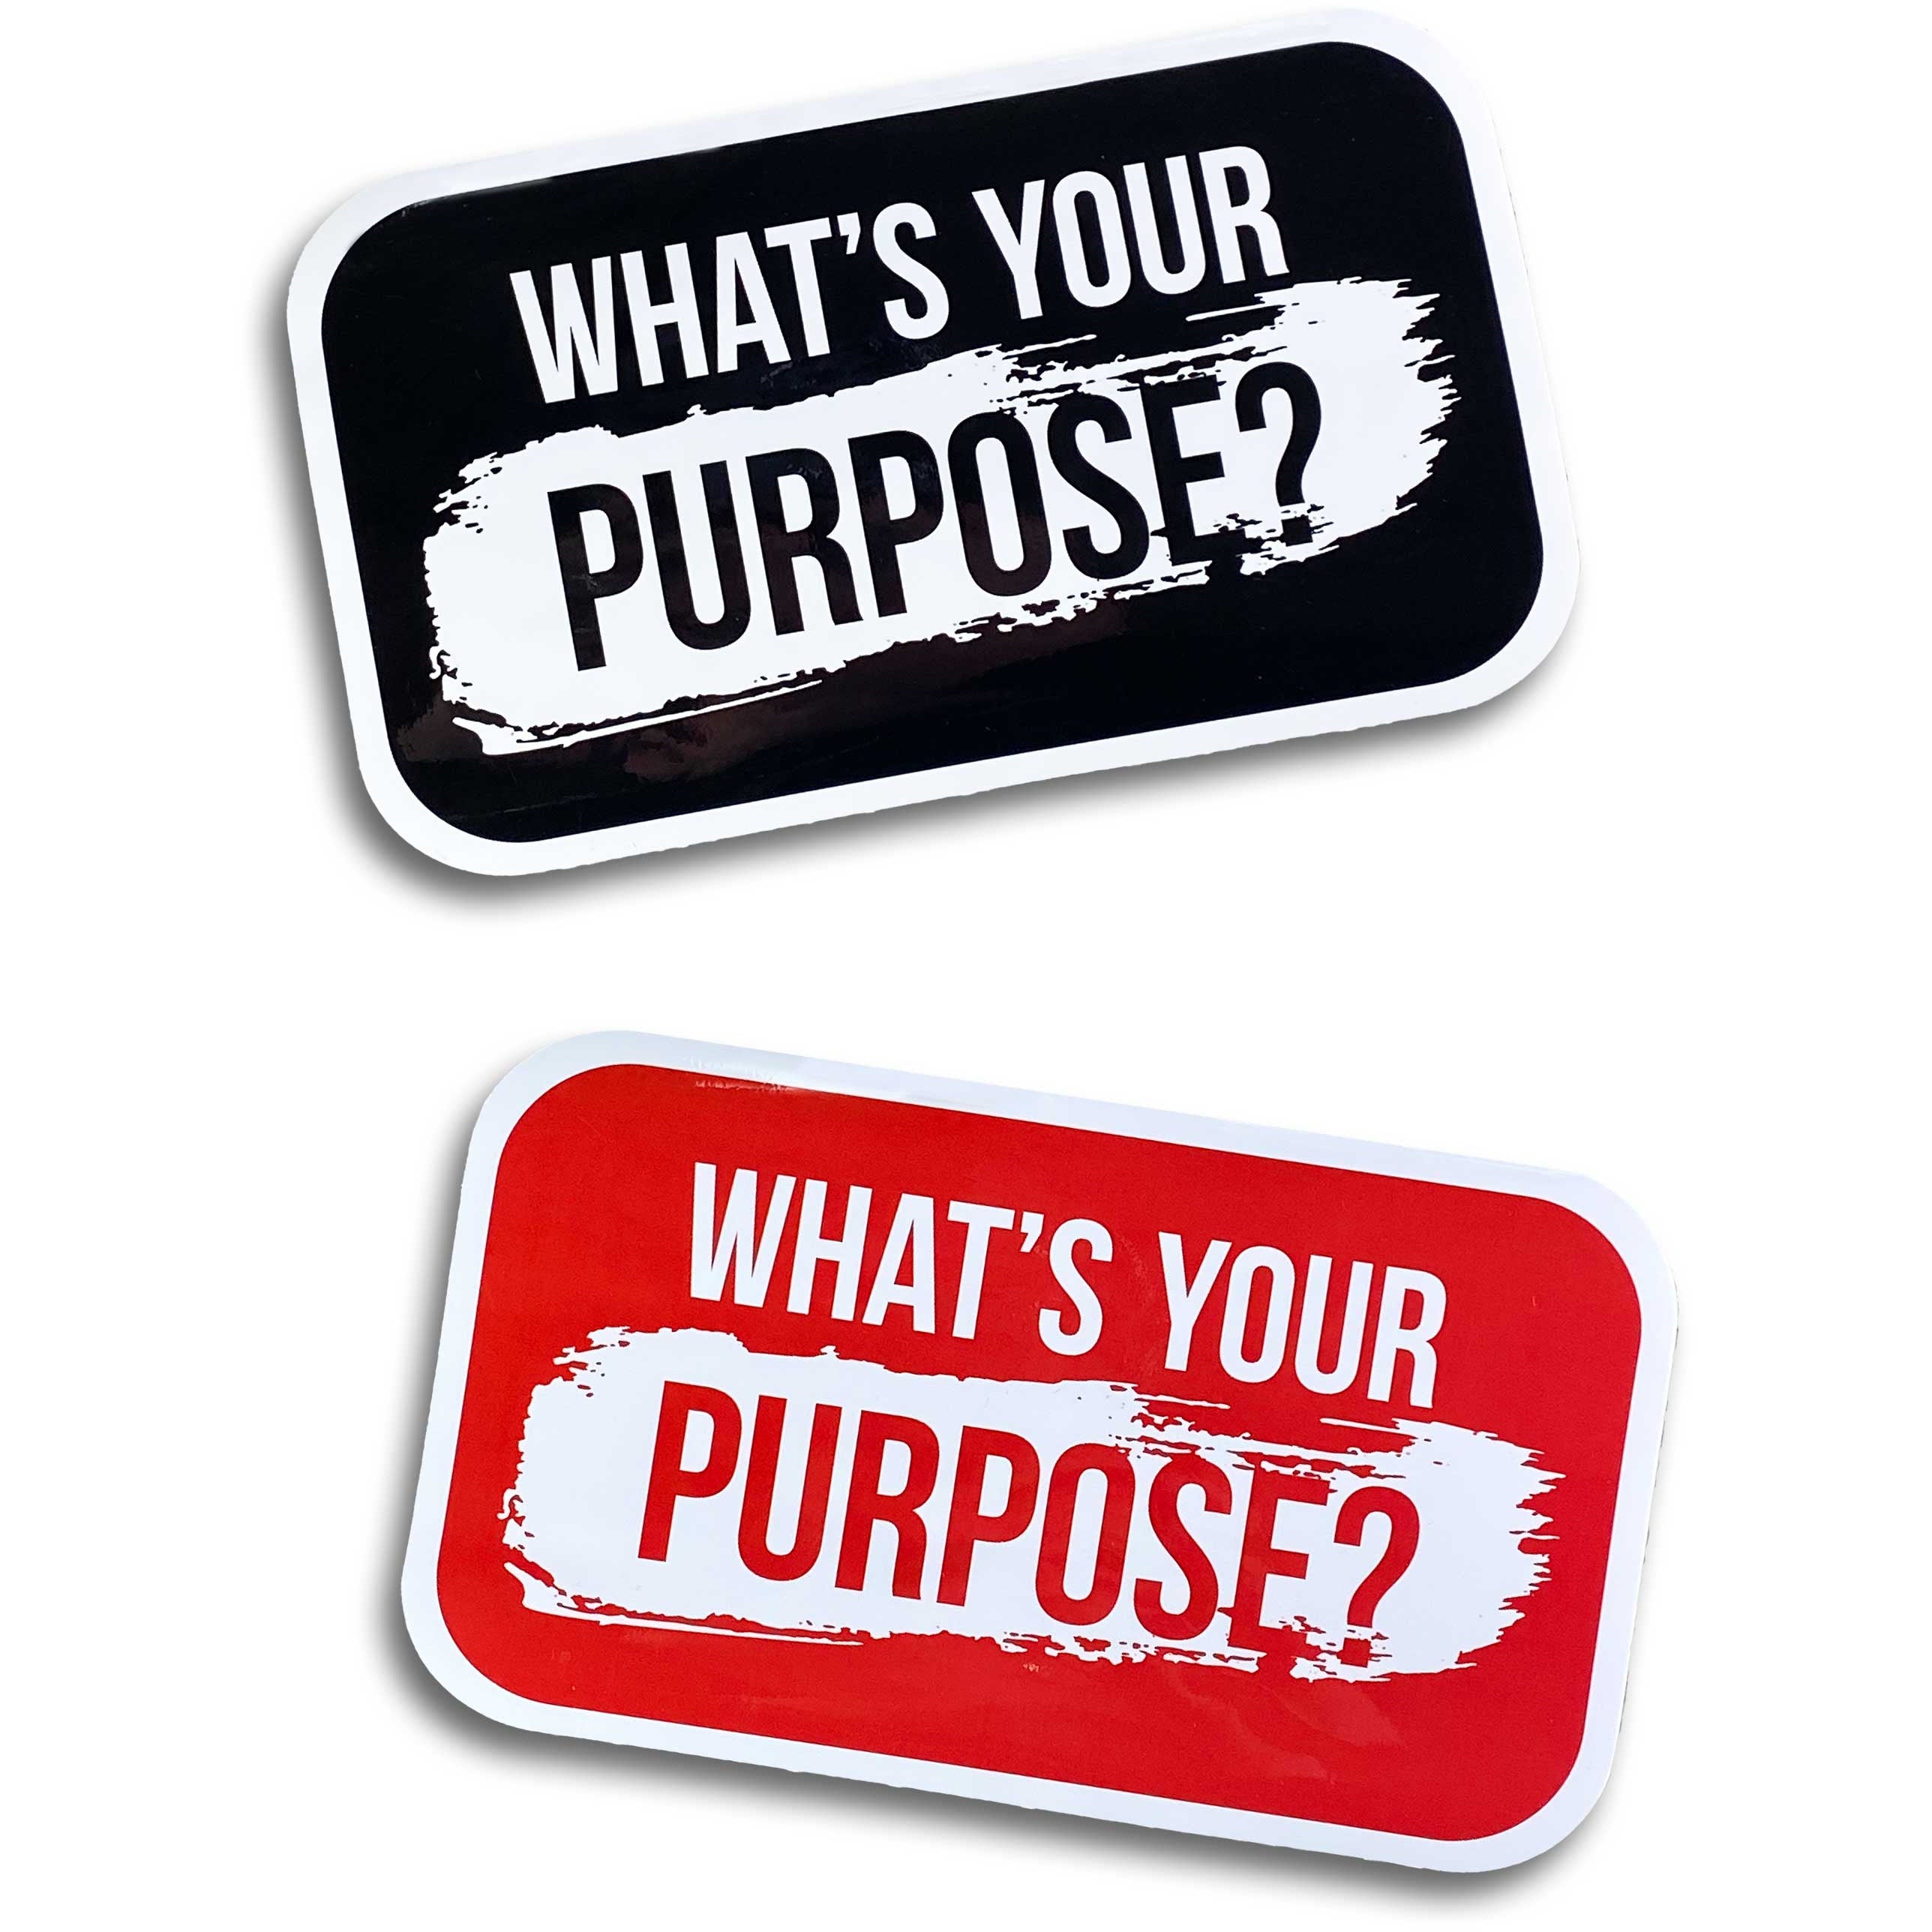 Vinyl Stickers: WHAT'S YOUR PURPOSE?